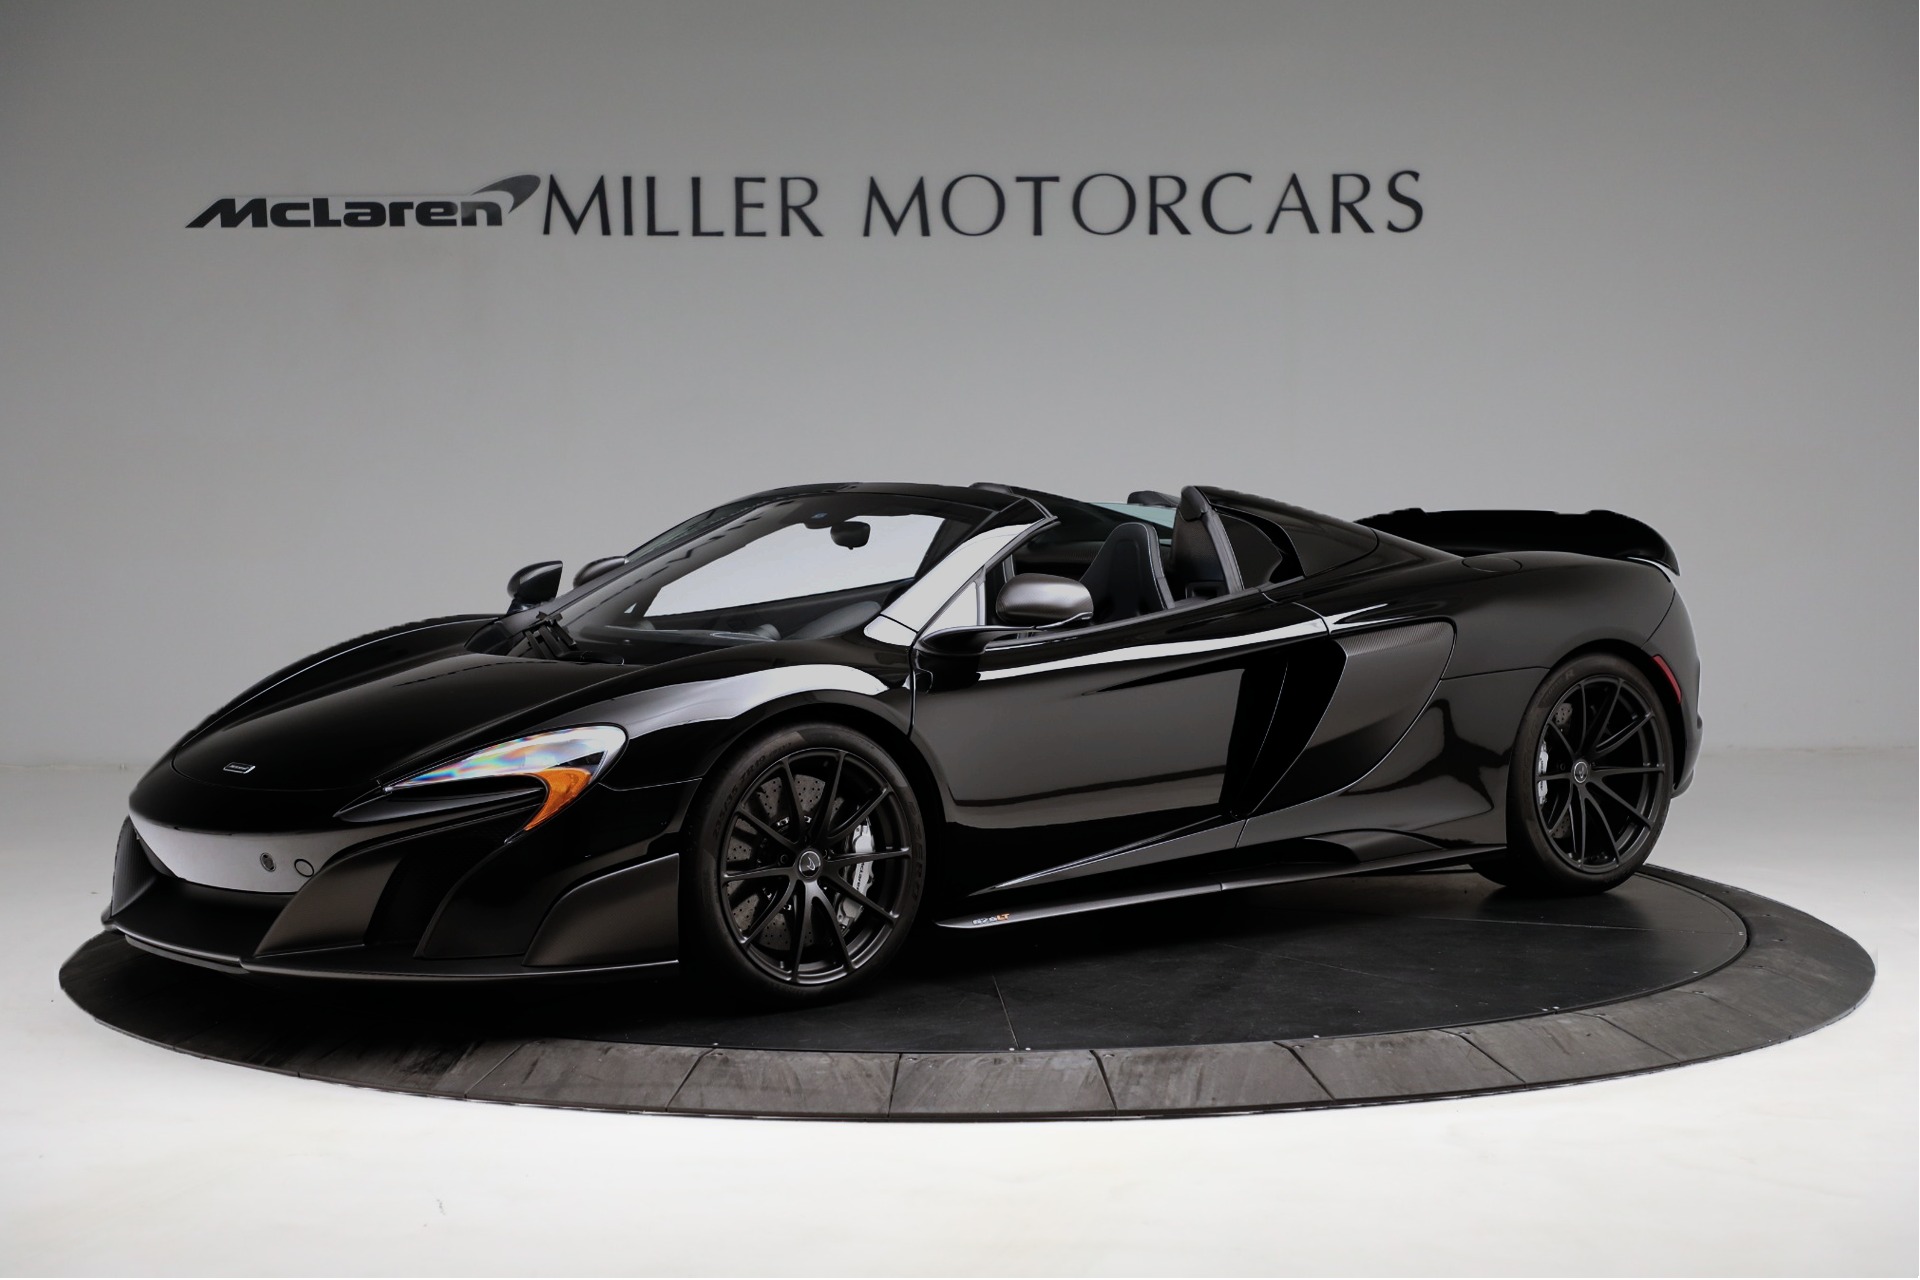 Used 2016 McLaren 675LT Spider for sale $327,900 at Aston Martin of Greenwich in Greenwich CT 06830 1